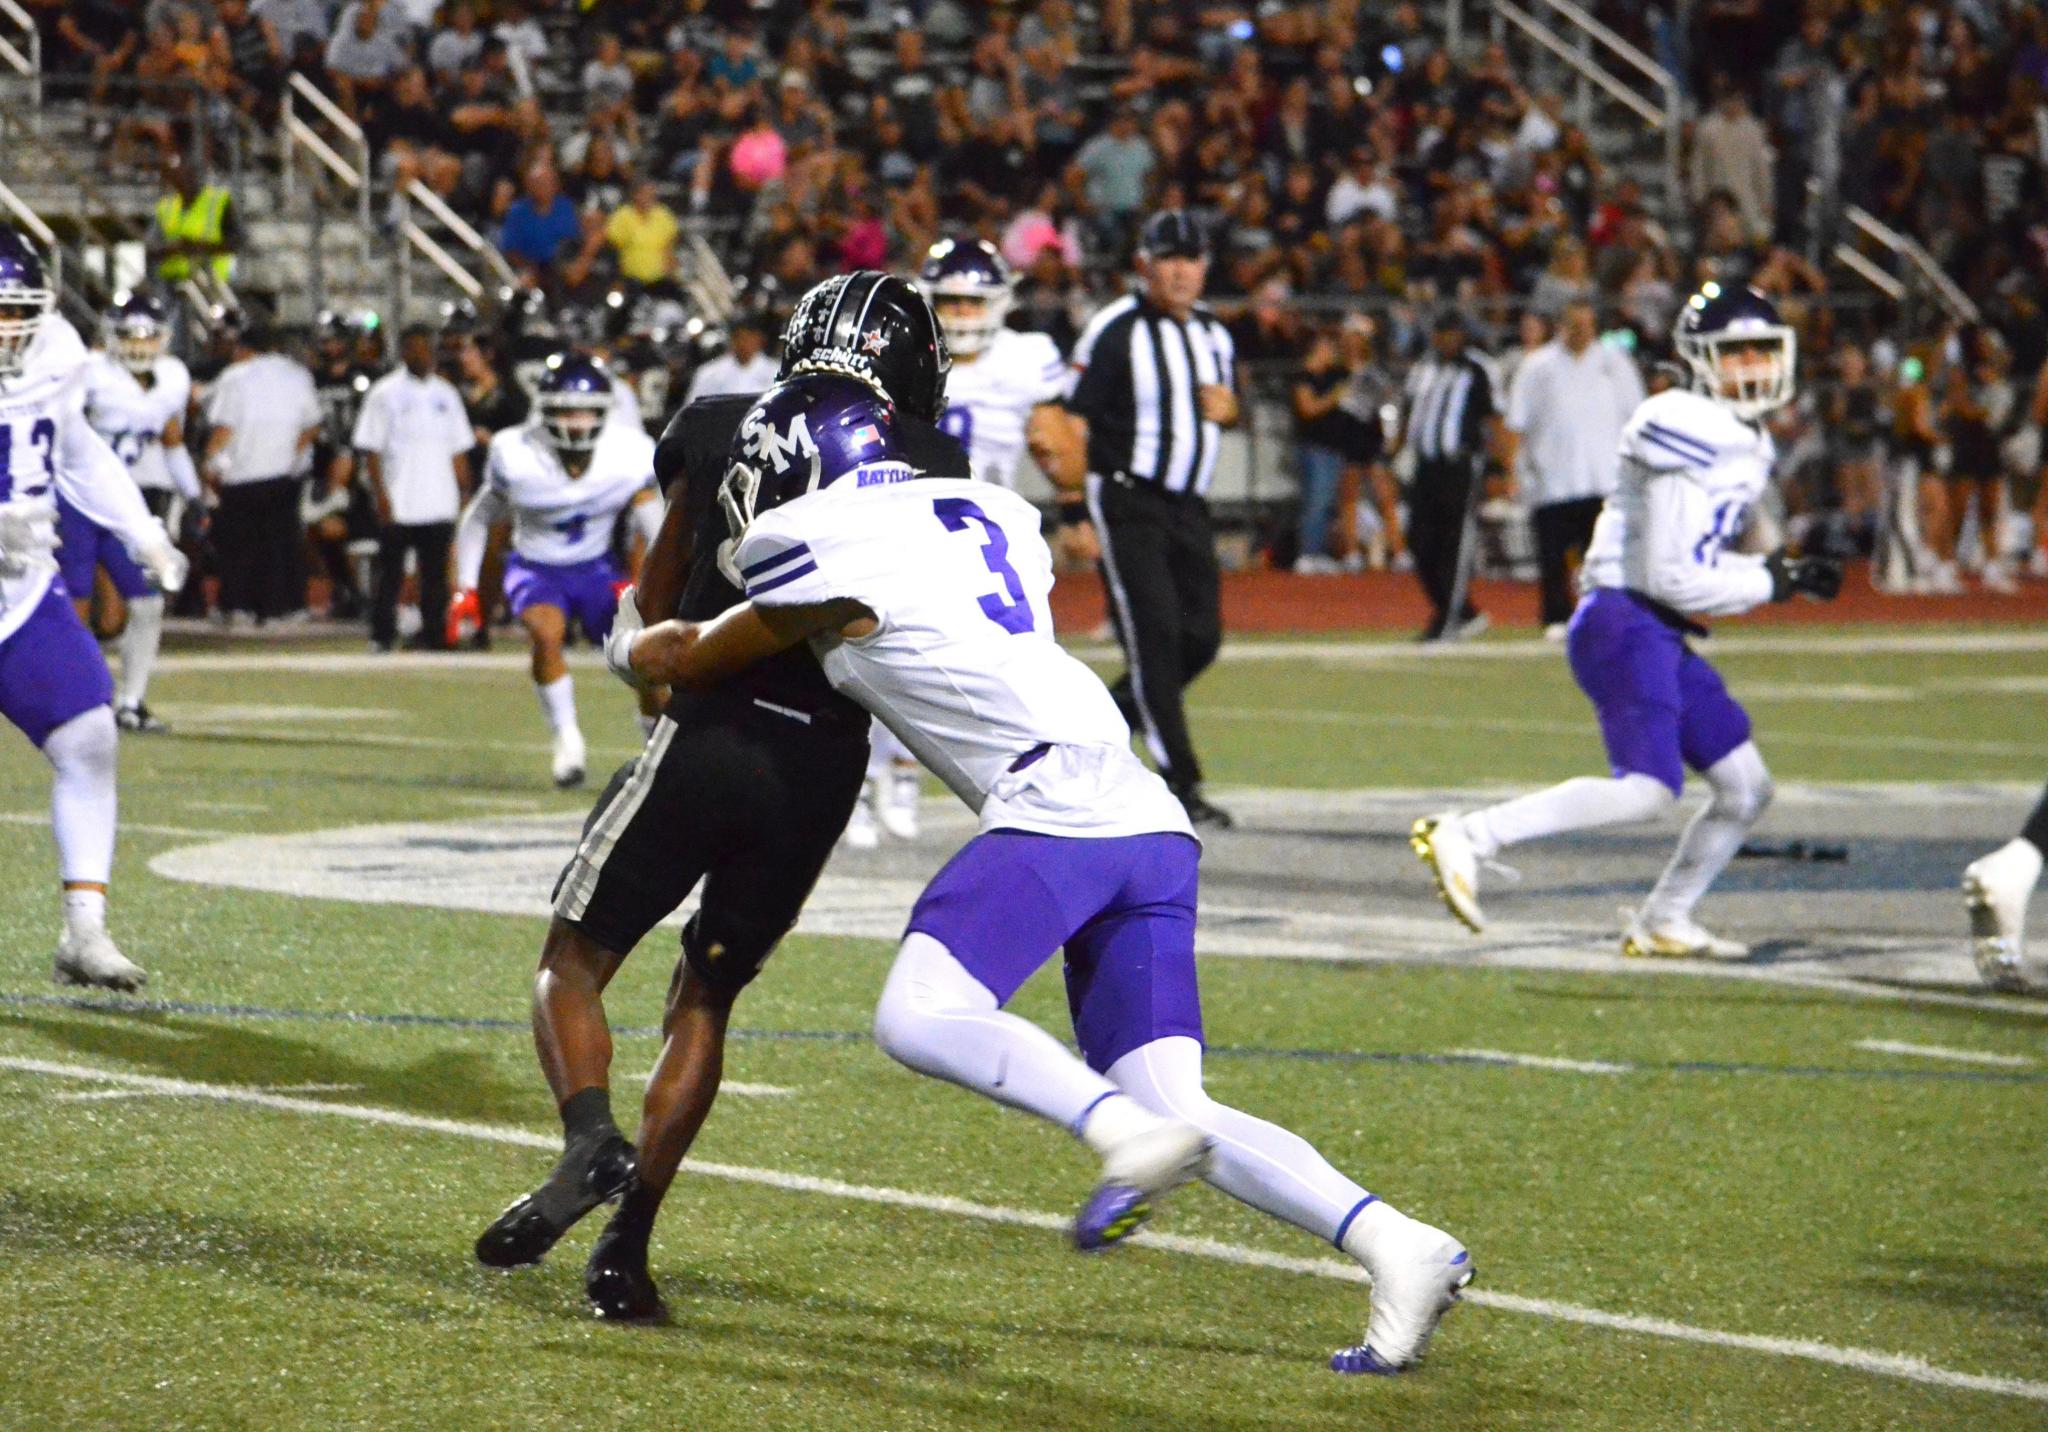 Rattlers are strong in first half, but fall to Cibolo Steele, 45-6